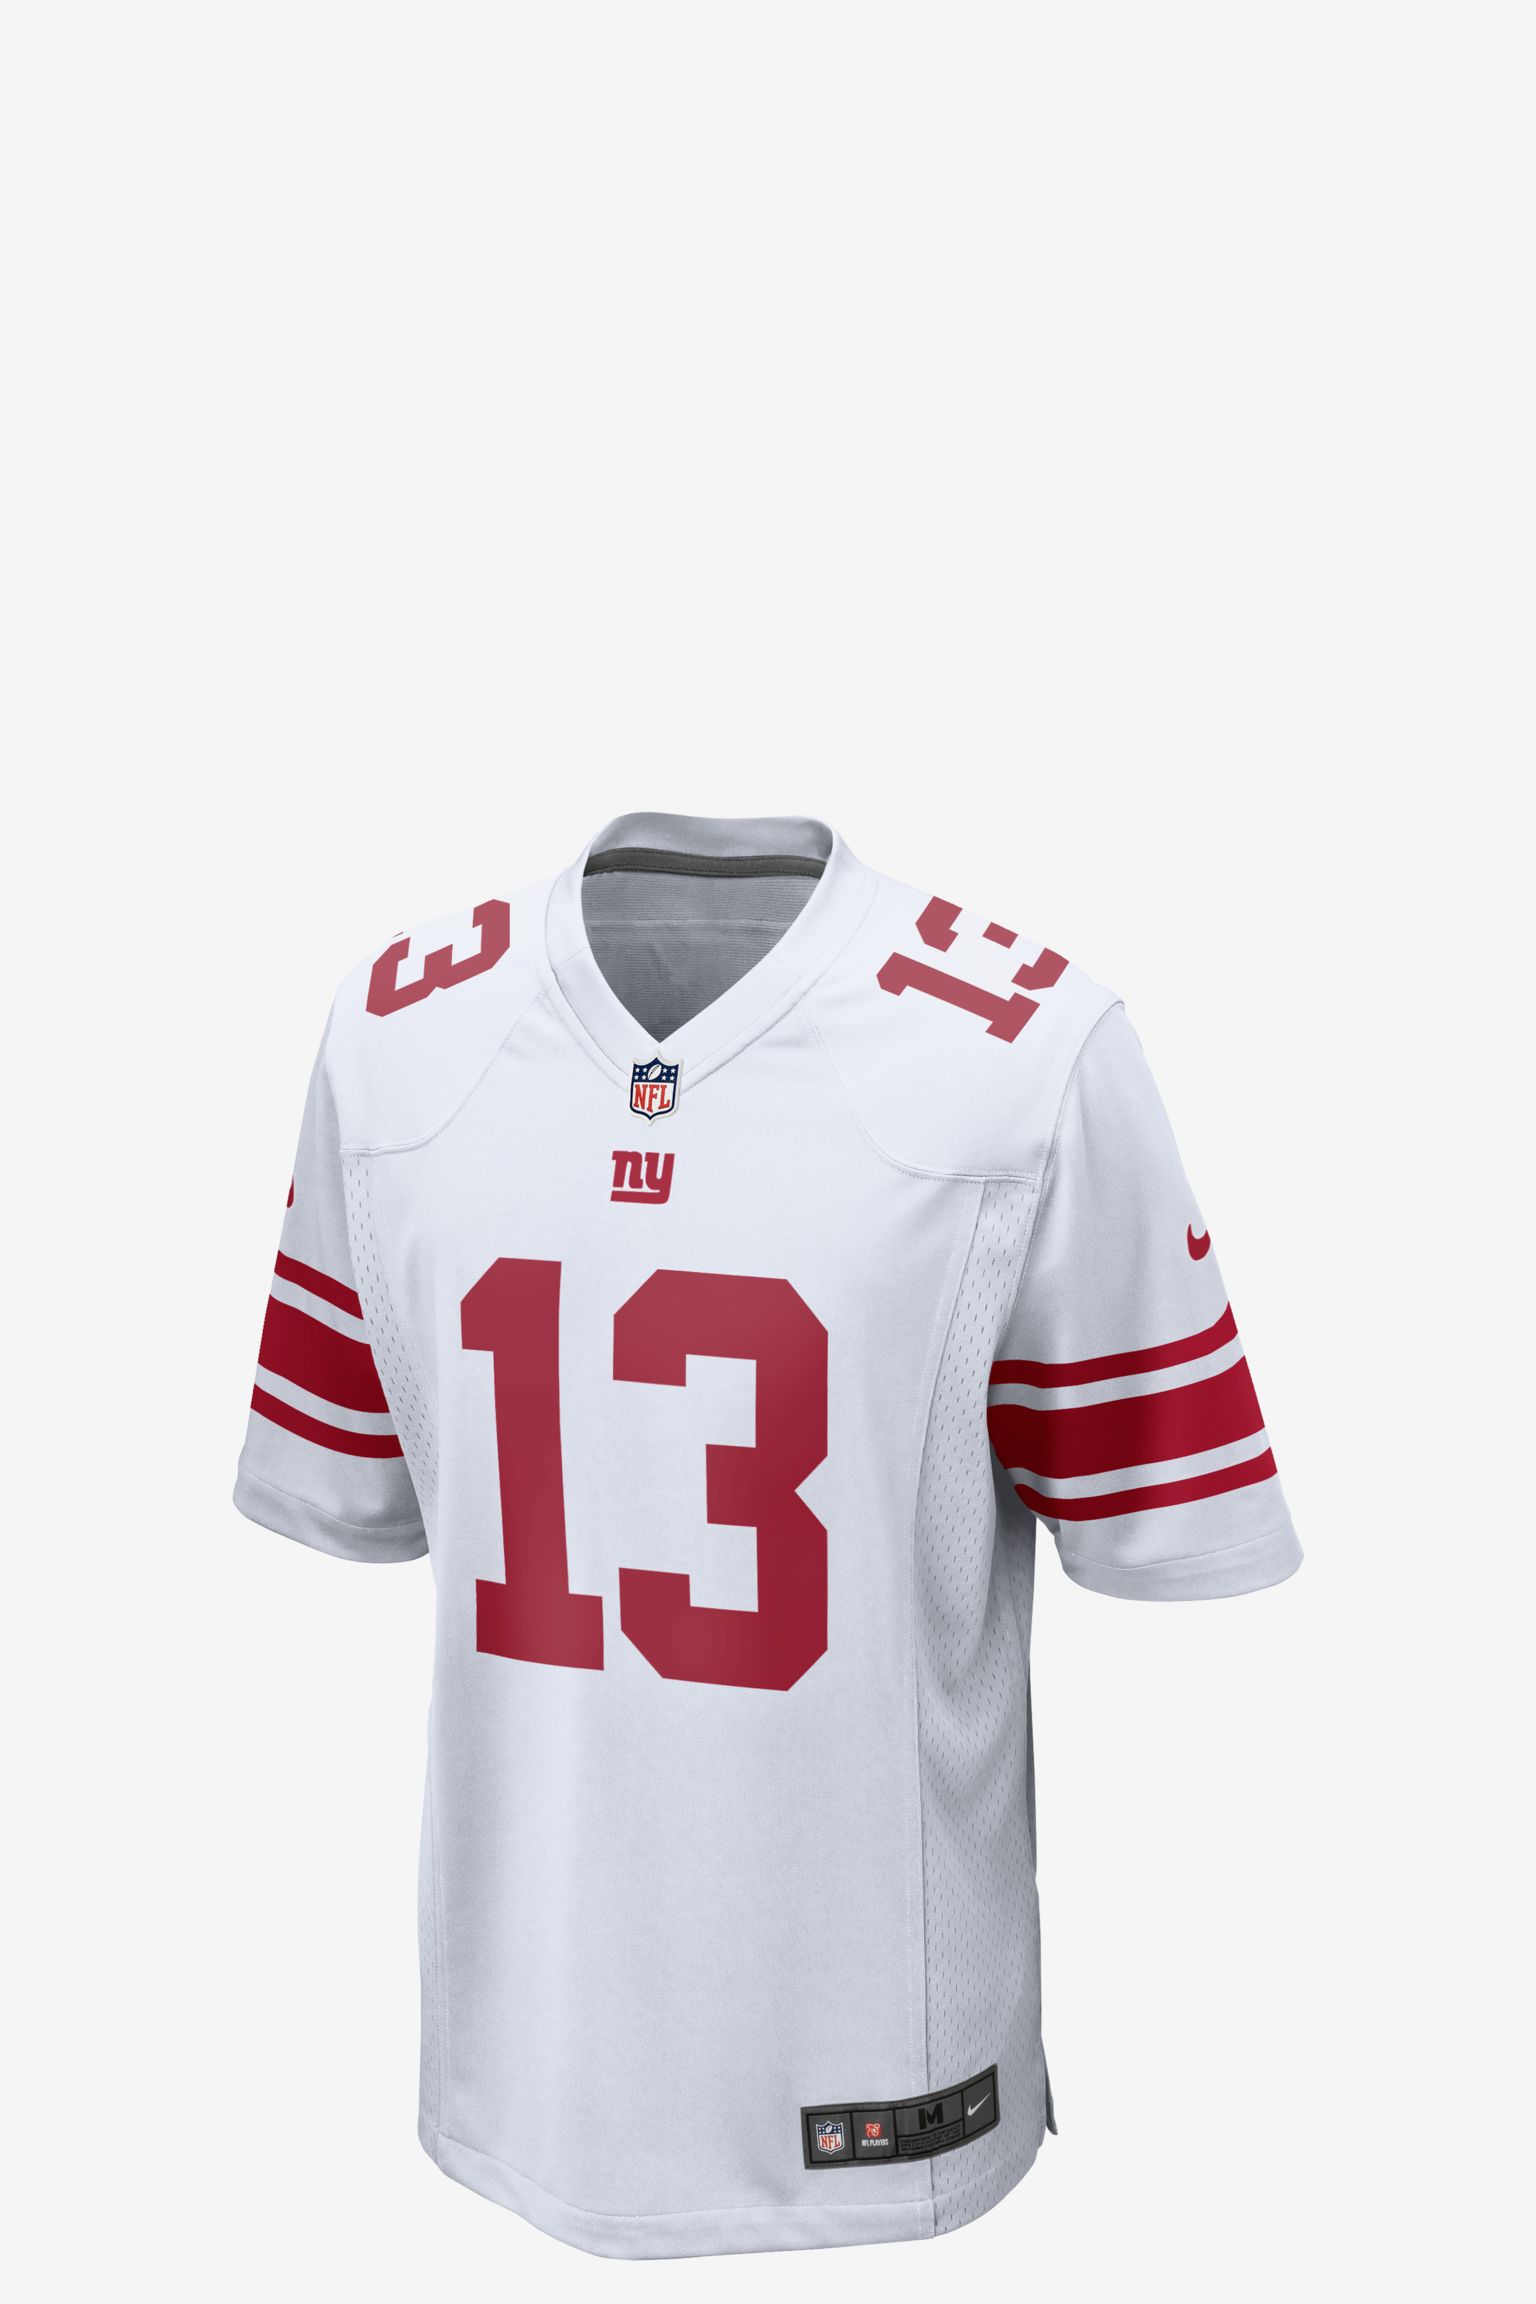 How Do Nike NFL American Football Jerseys Differ?